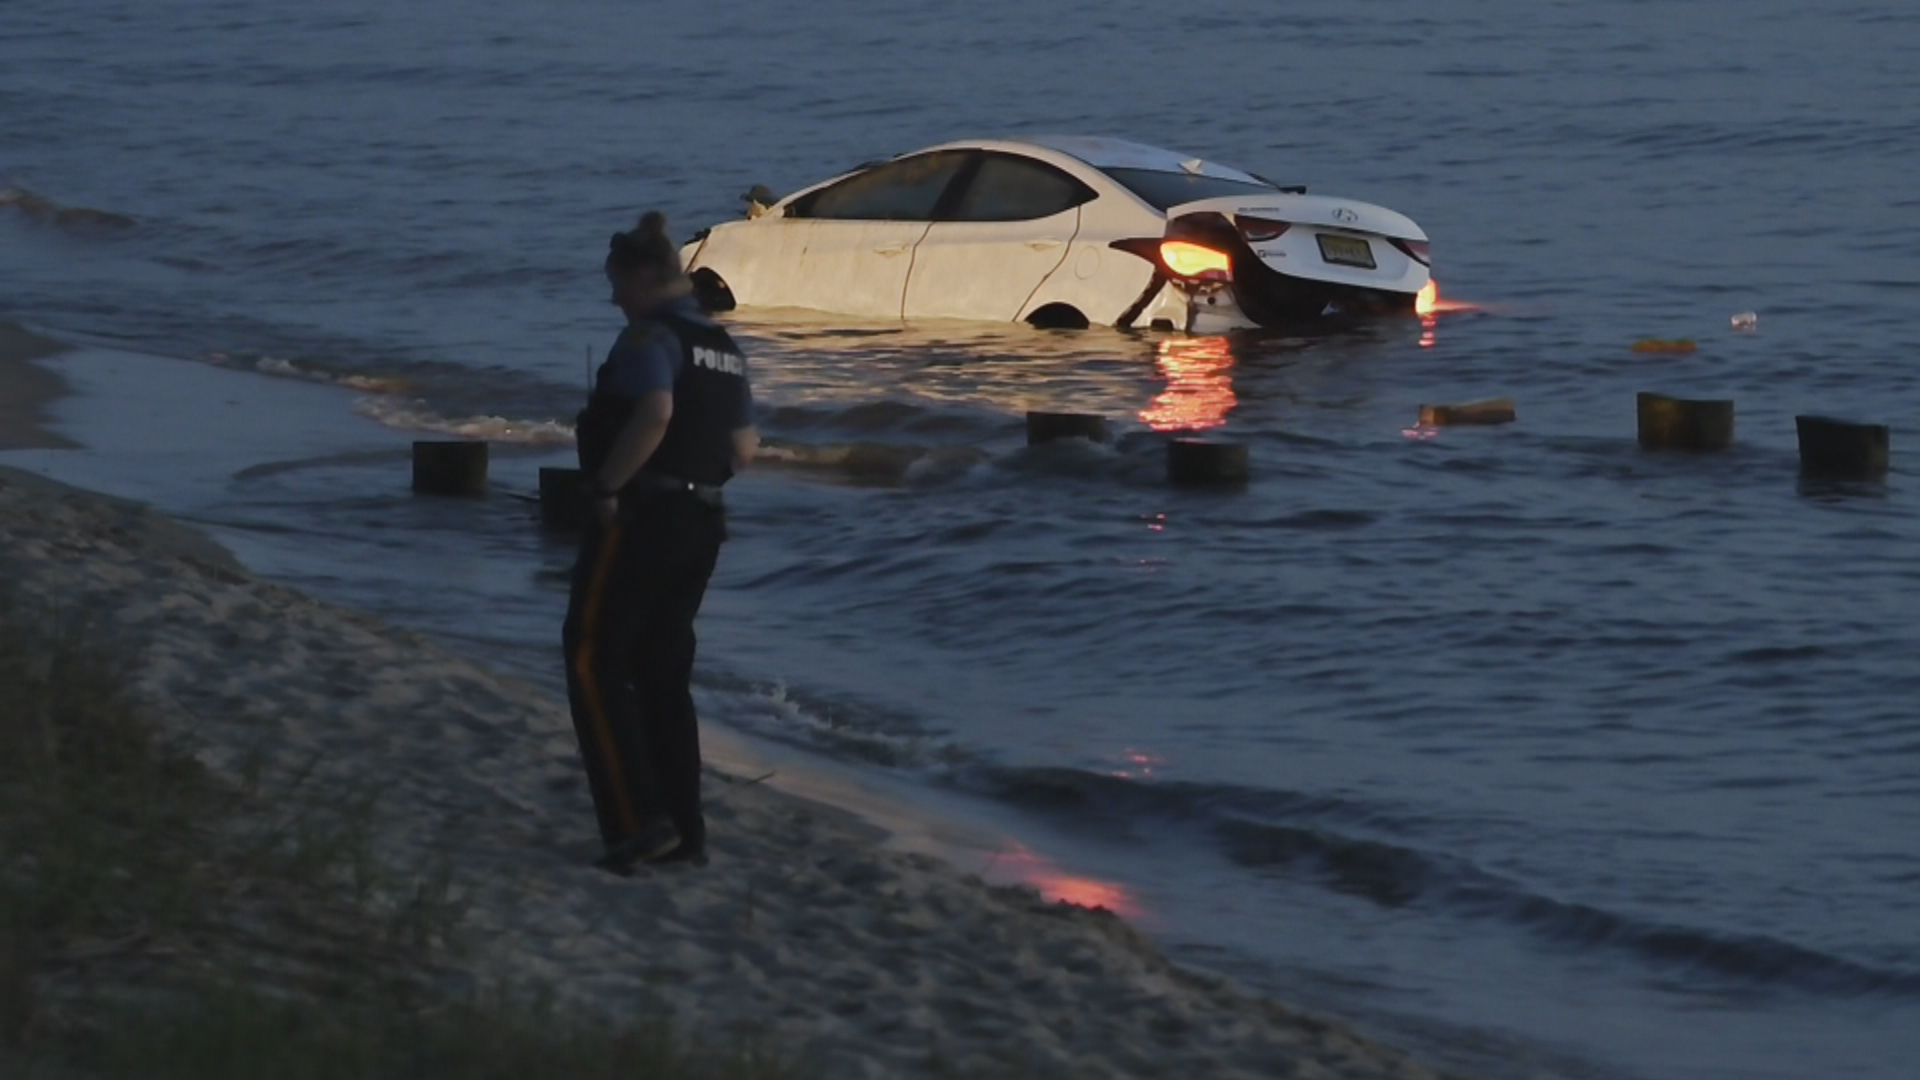 2 People Injured After Driver Suffers Seizure And Crashes Car Into Water In Cape May County